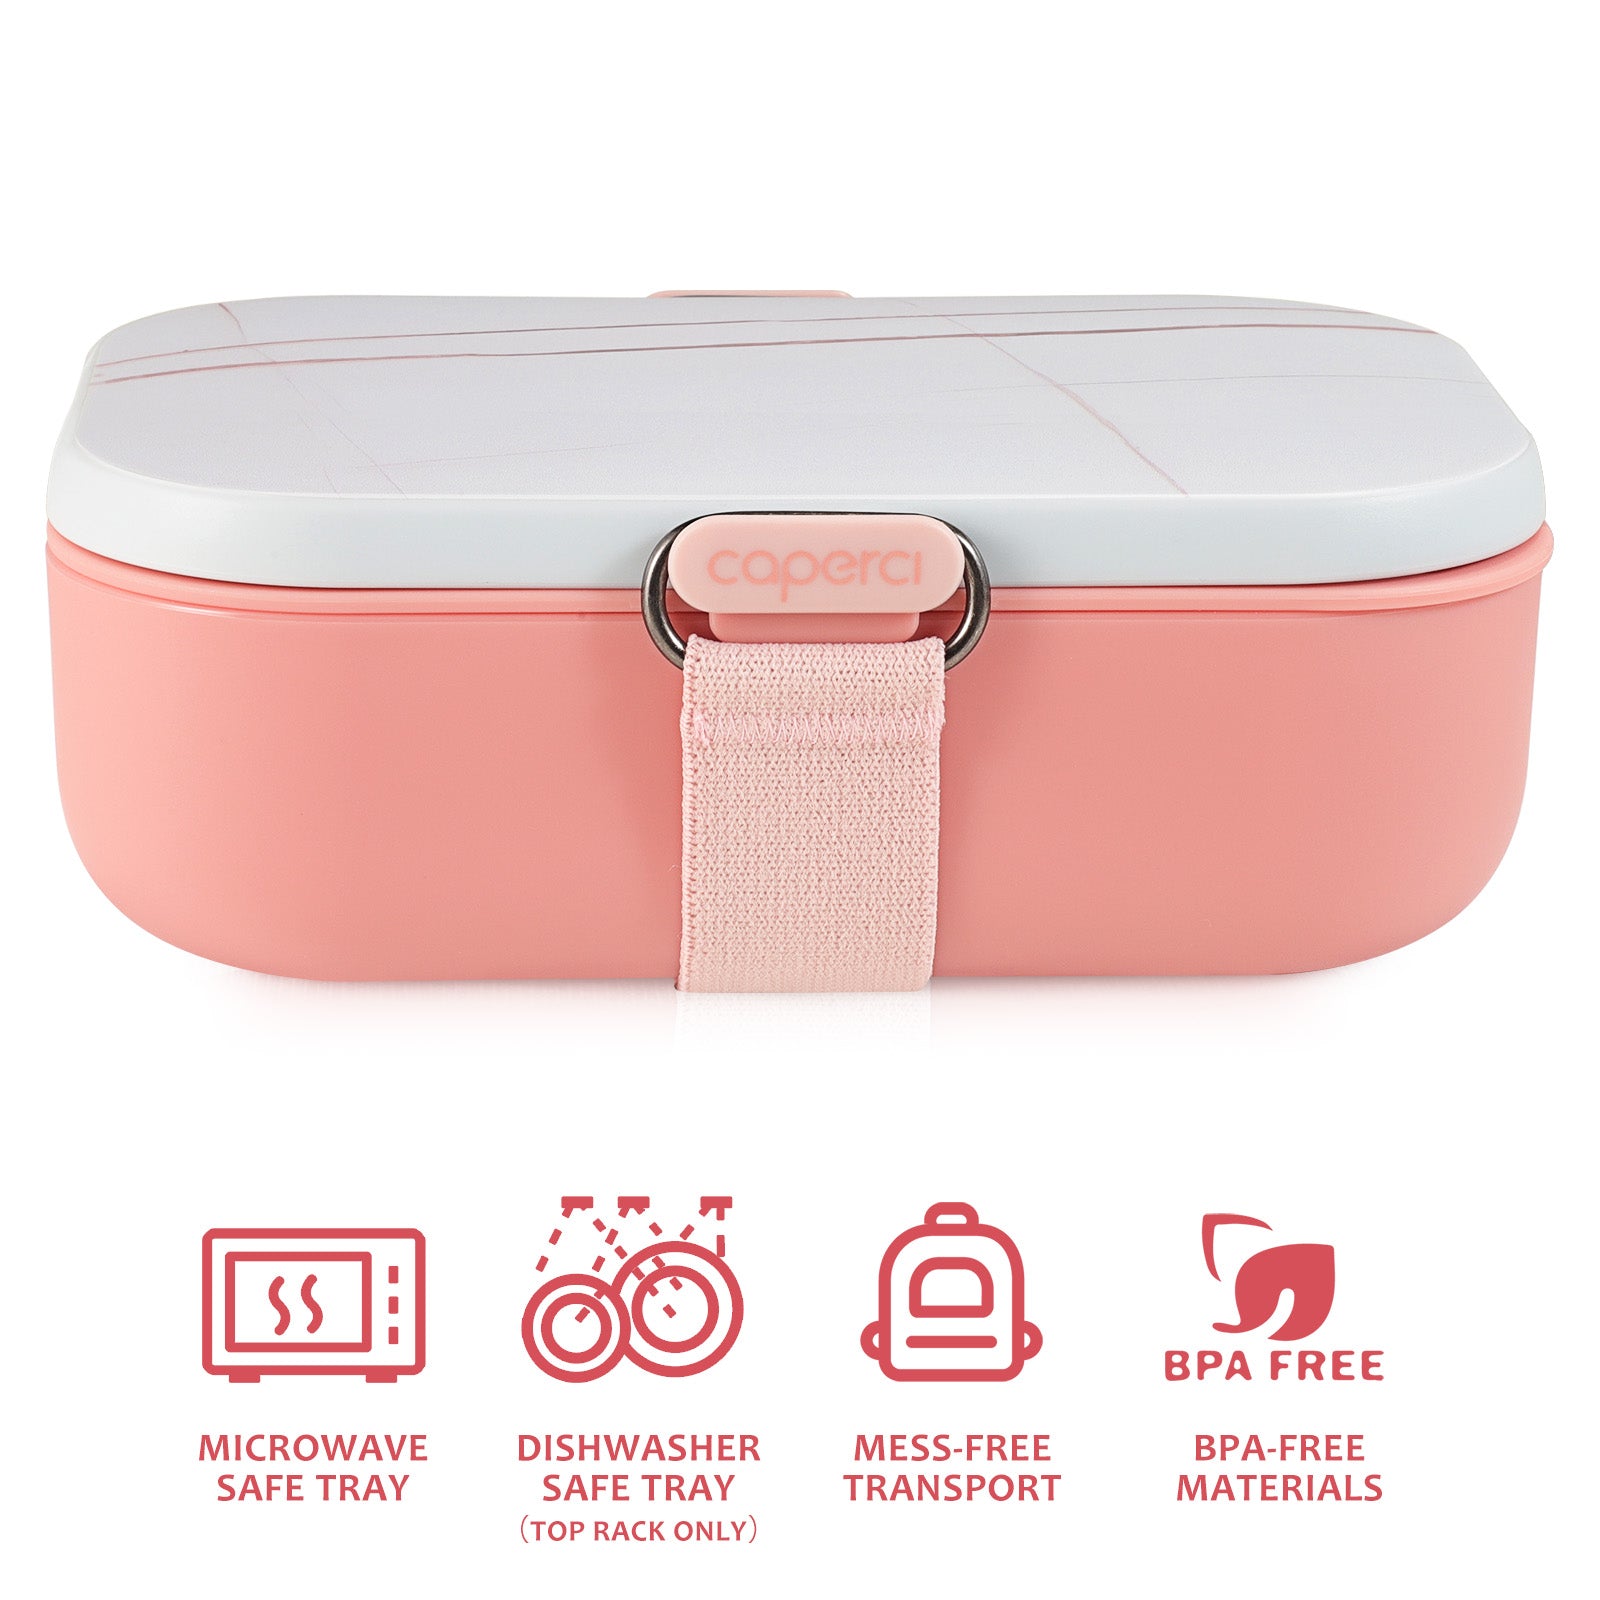 Caperci Modern Bento Lunch Box for Adult